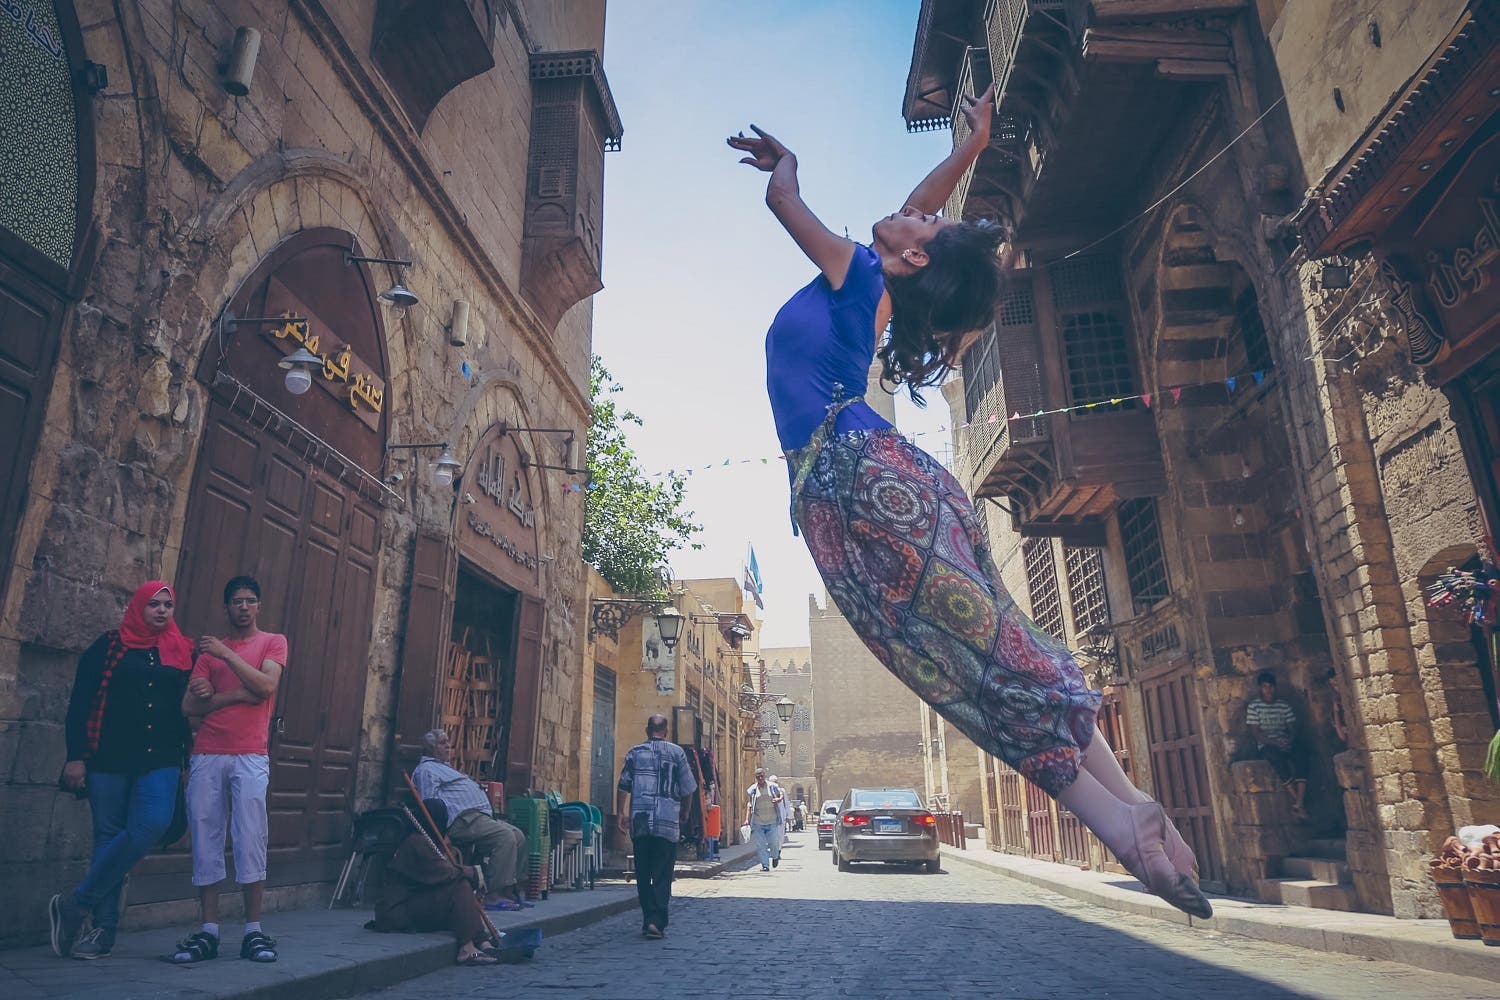 Courtesy: Ballerinas of Cairo/ Mohamed Taher/ Ahmed Fathy